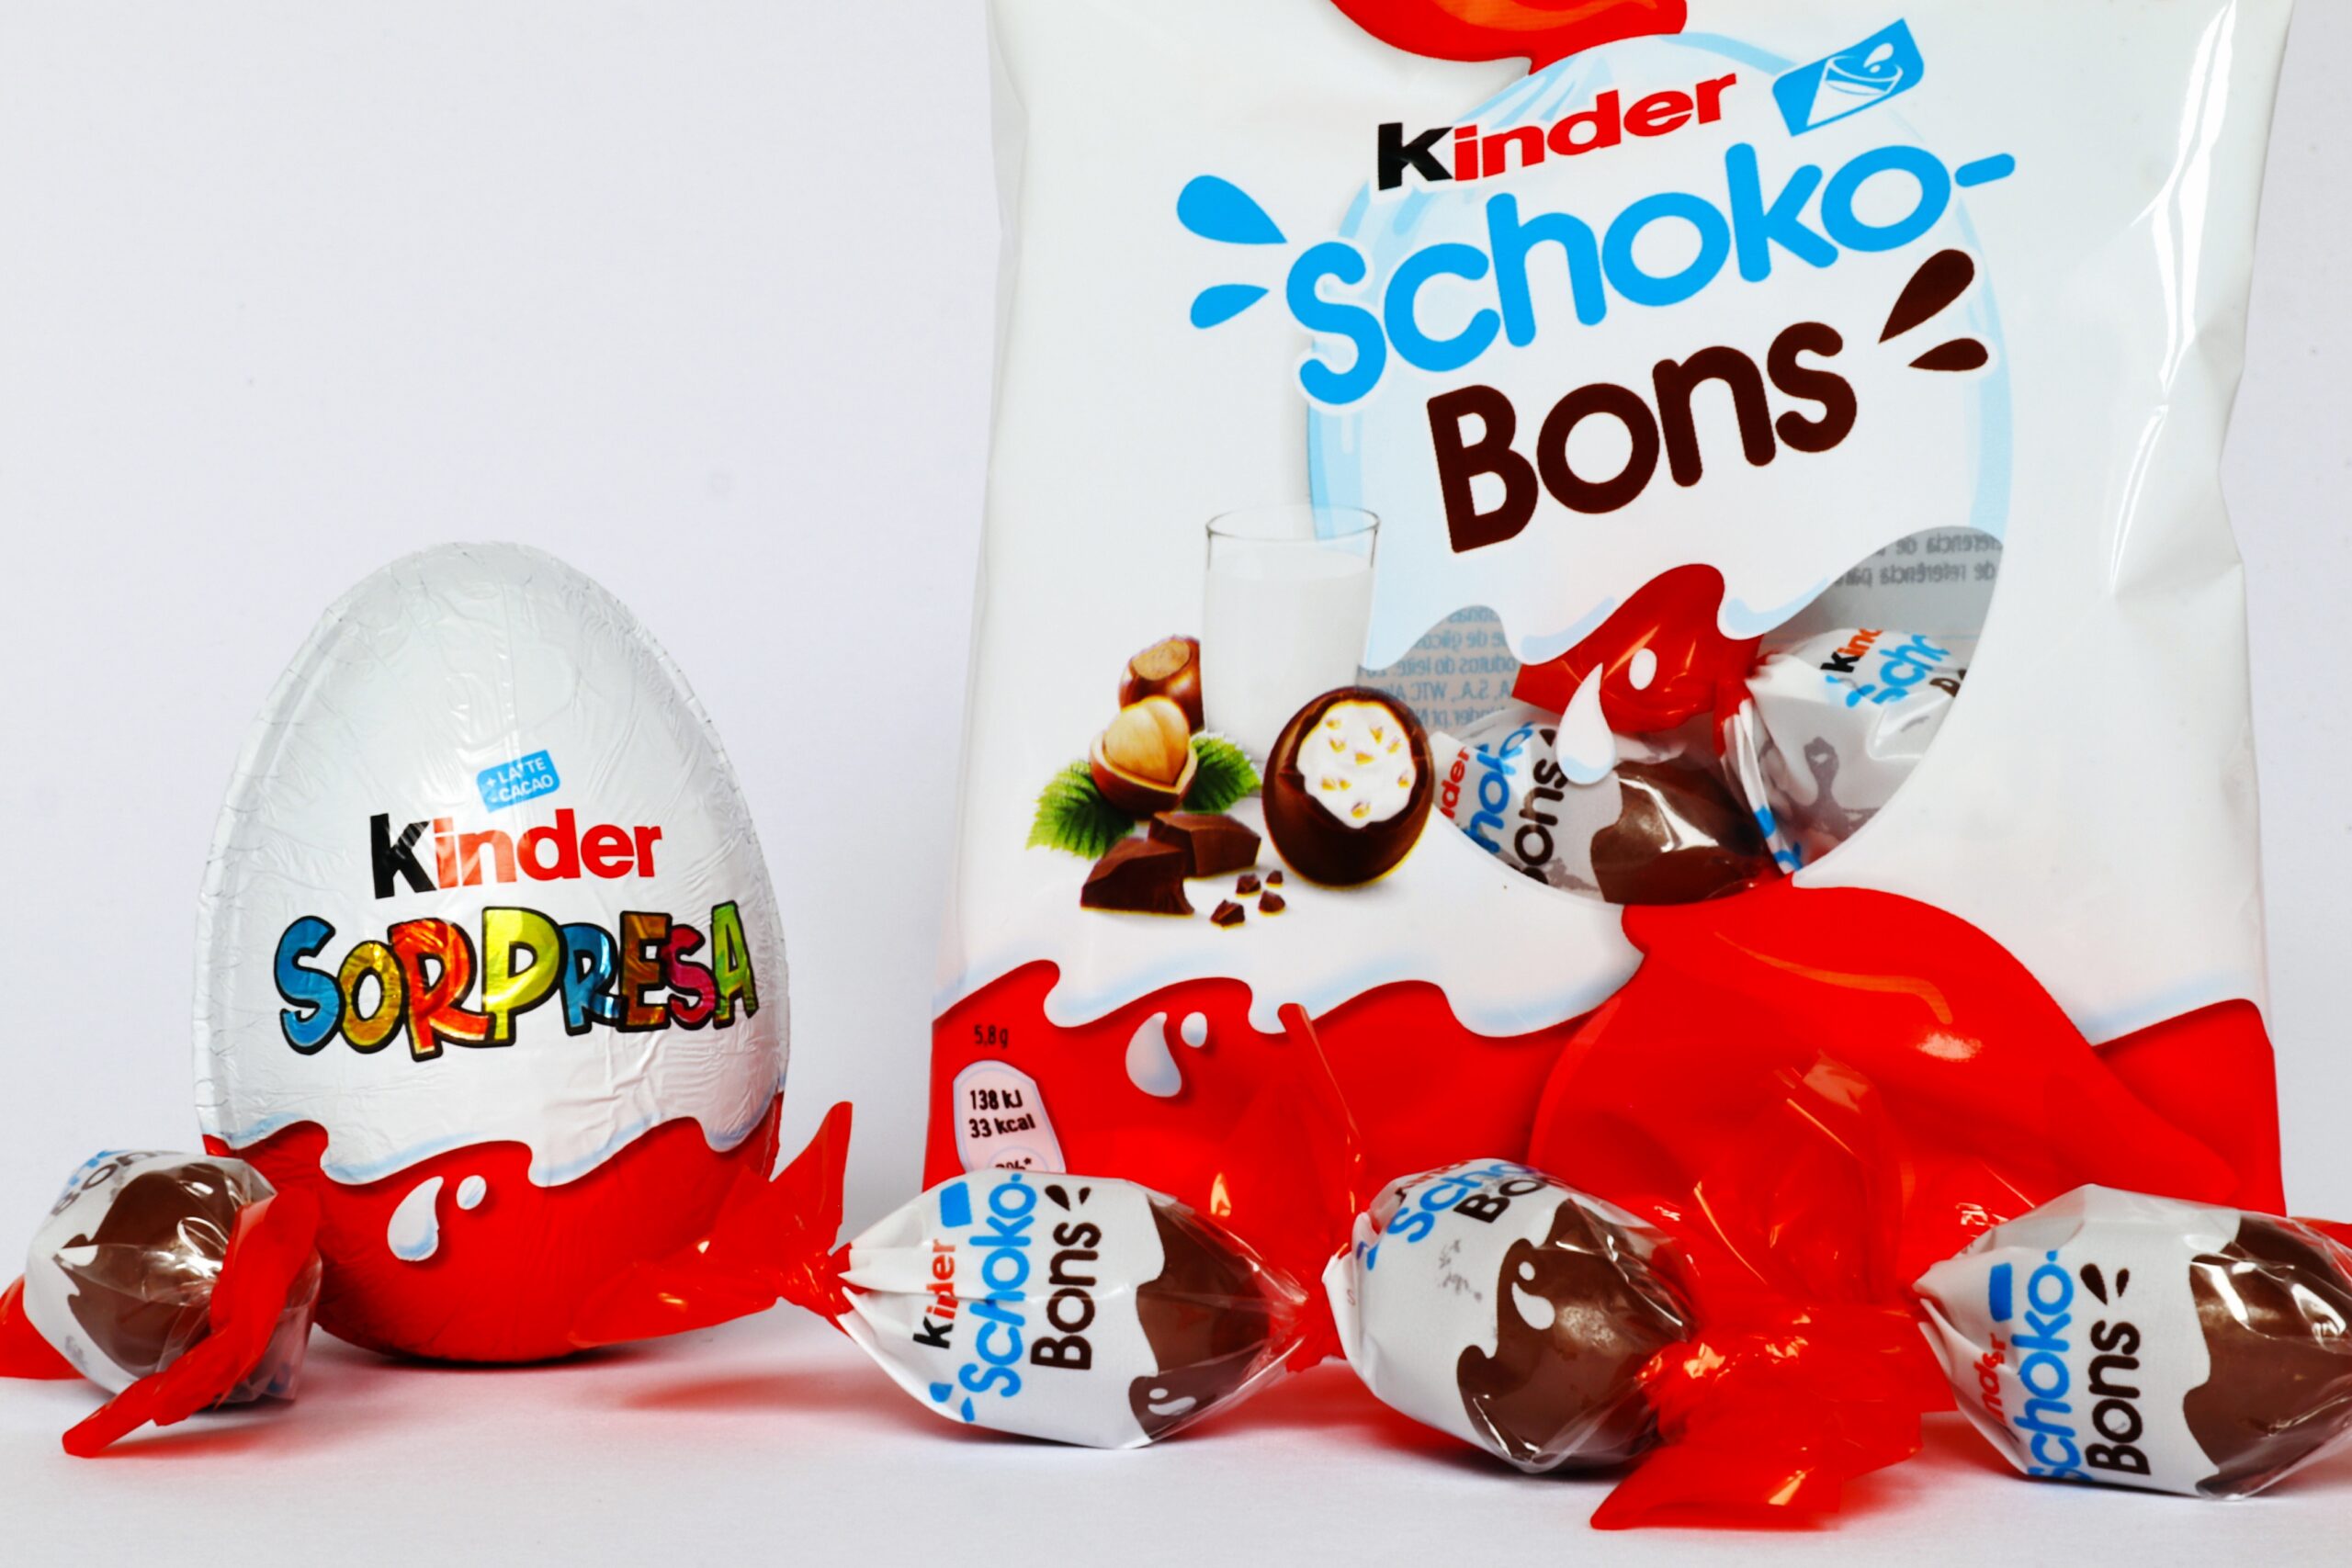 Kinder recall – Ferrero conditionally approved to reopen salmonella-hit Belgium plant